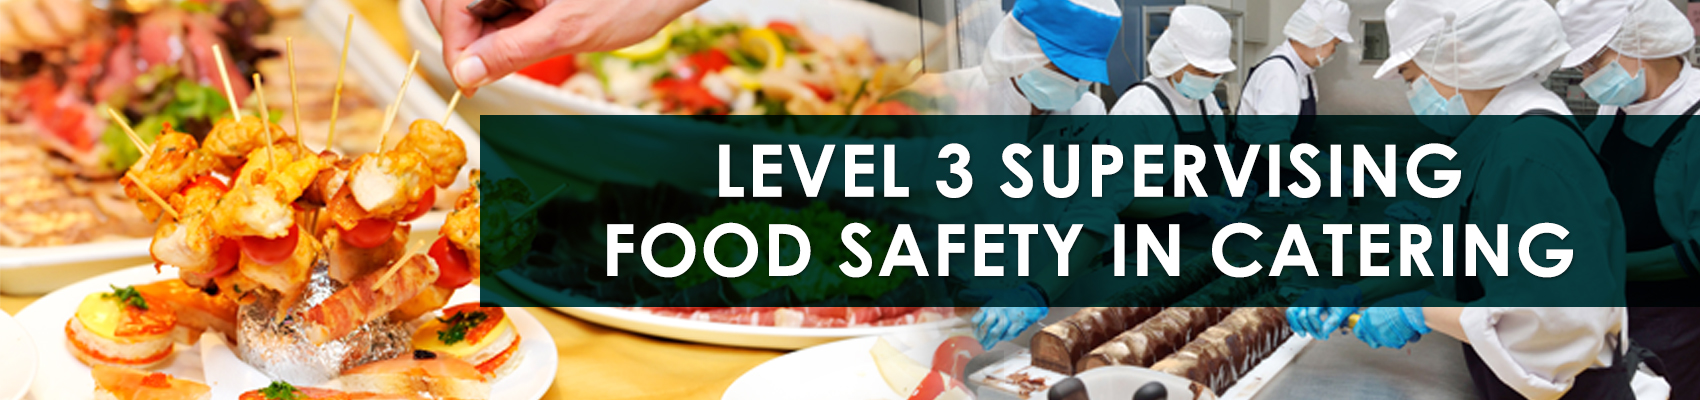 Level 3 Supervising Food Safety in Catering